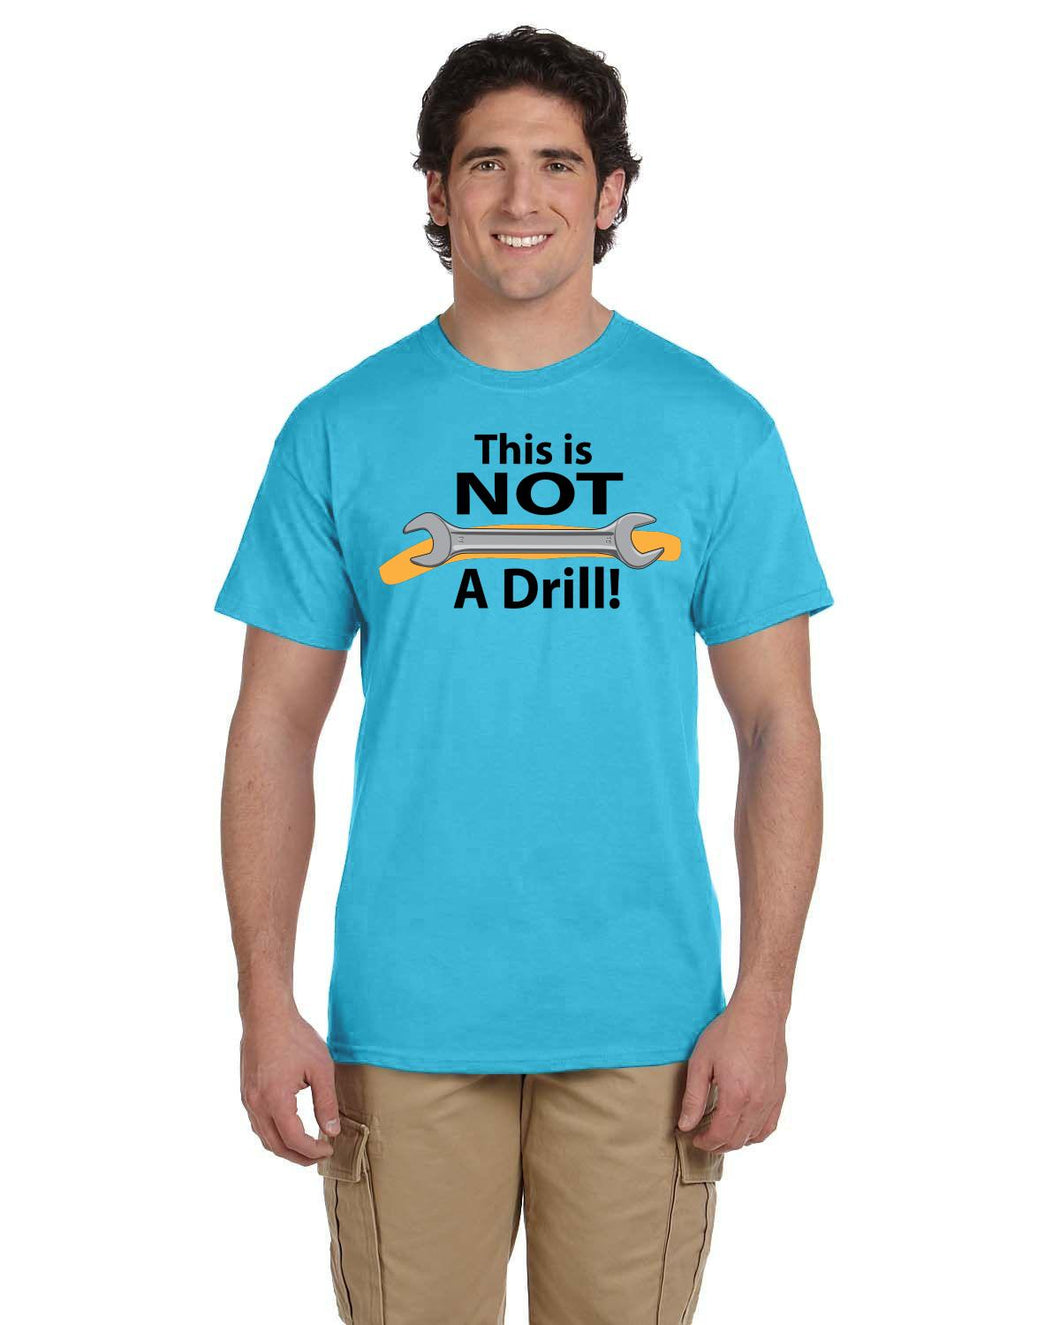 This is NOT a Drill! t-shirt